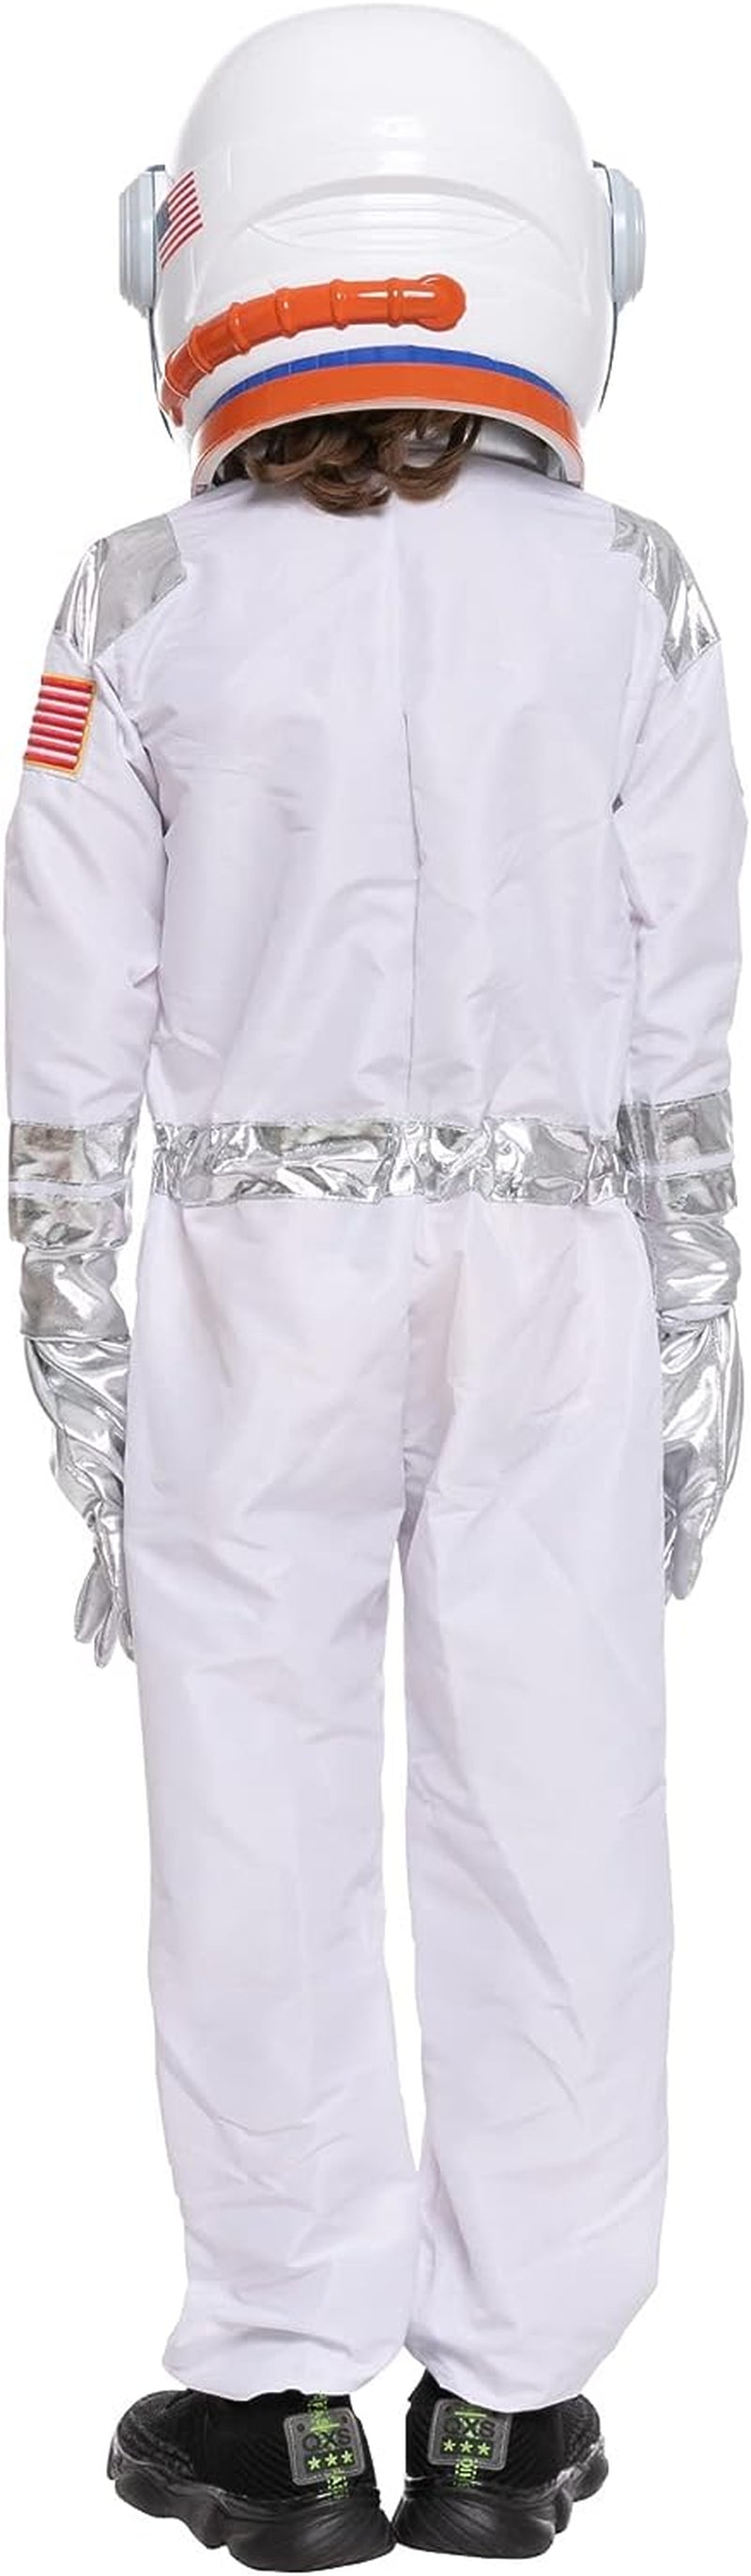 Spooktacular Creations Halloween Child Unisex Astronaut Costume with Silver Stripes for Party Favors (Medium (8-10Yr))